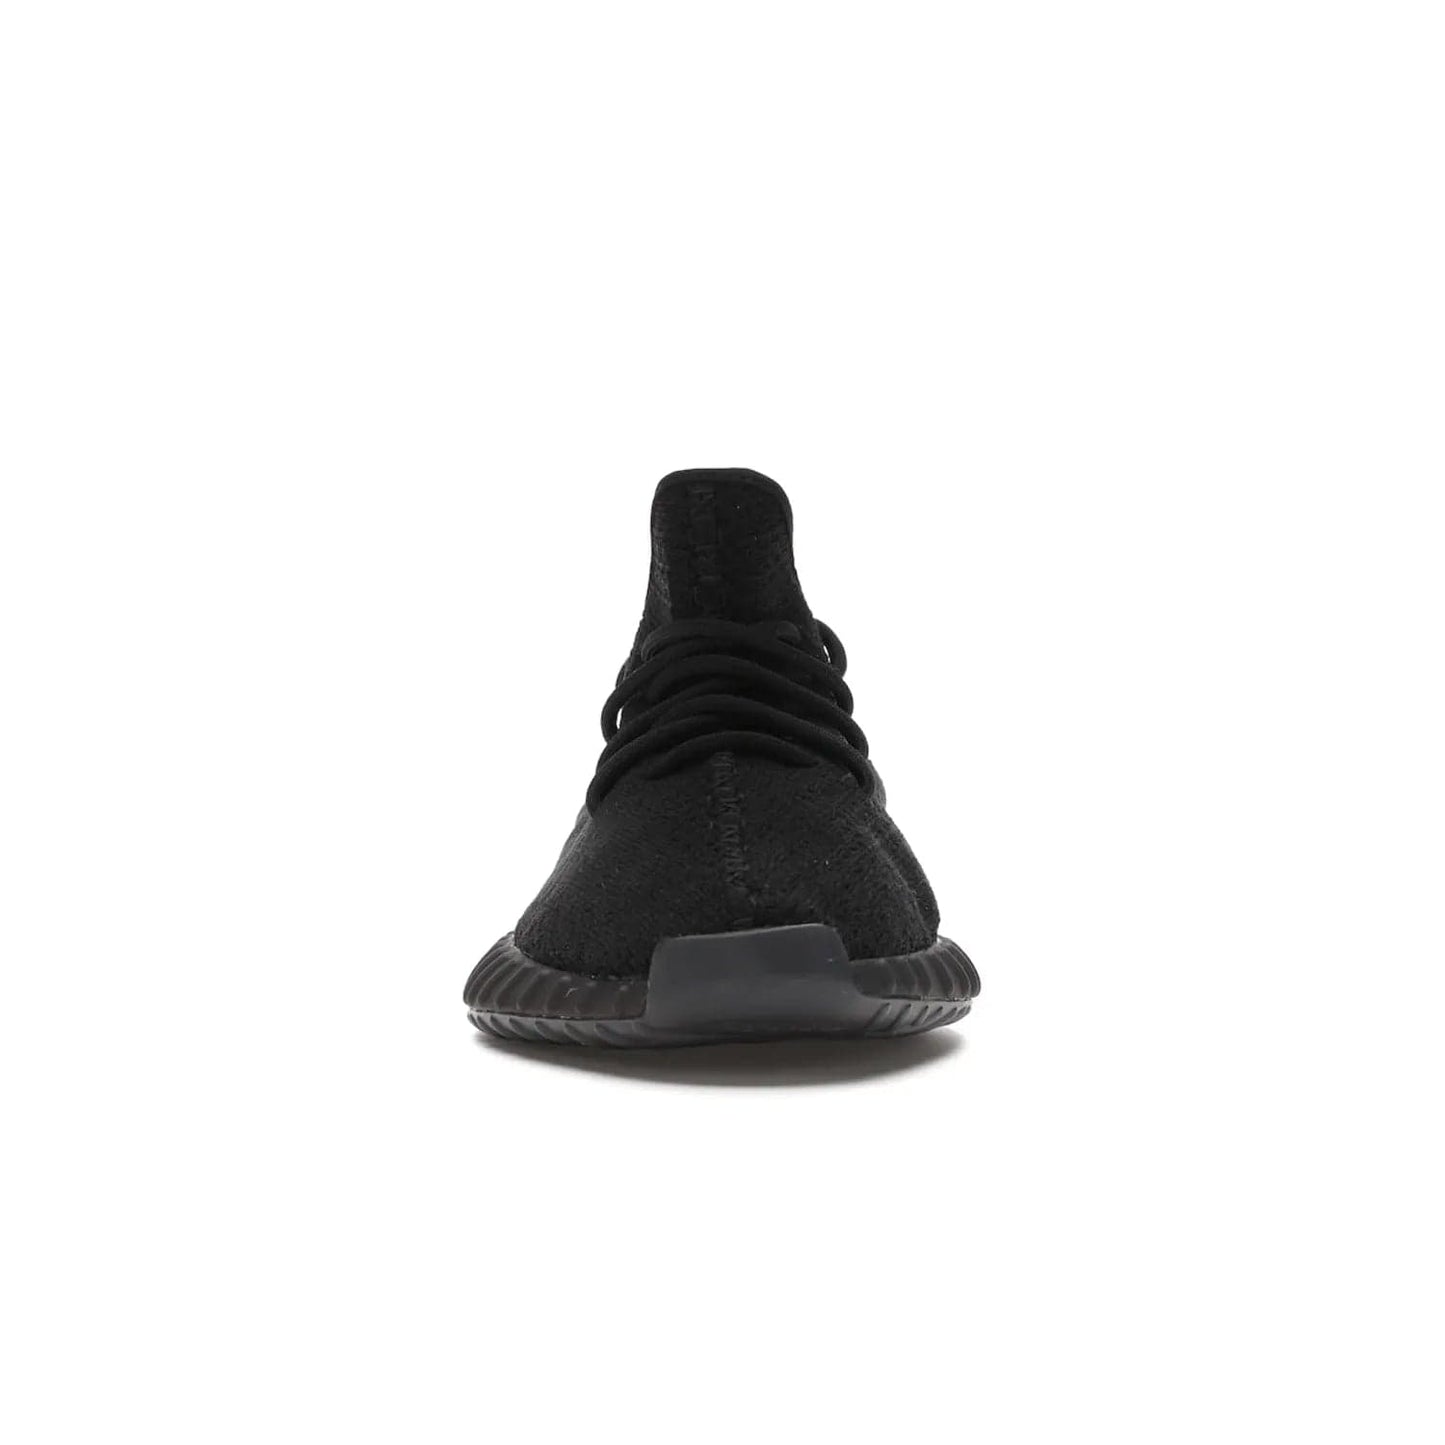 adidas Yeezy Boost 350 V2 Black Red (2017/2020) - Image 10 - Only at www.BallersClubKickz.com - Adidas Yeezy Boost 350 V2 Black Red: a classic colorway featuring black Primeknit upper, BOOST cushioning system, and iconic "SPLY-350" text. Released in 2017 for a retail price of $220.